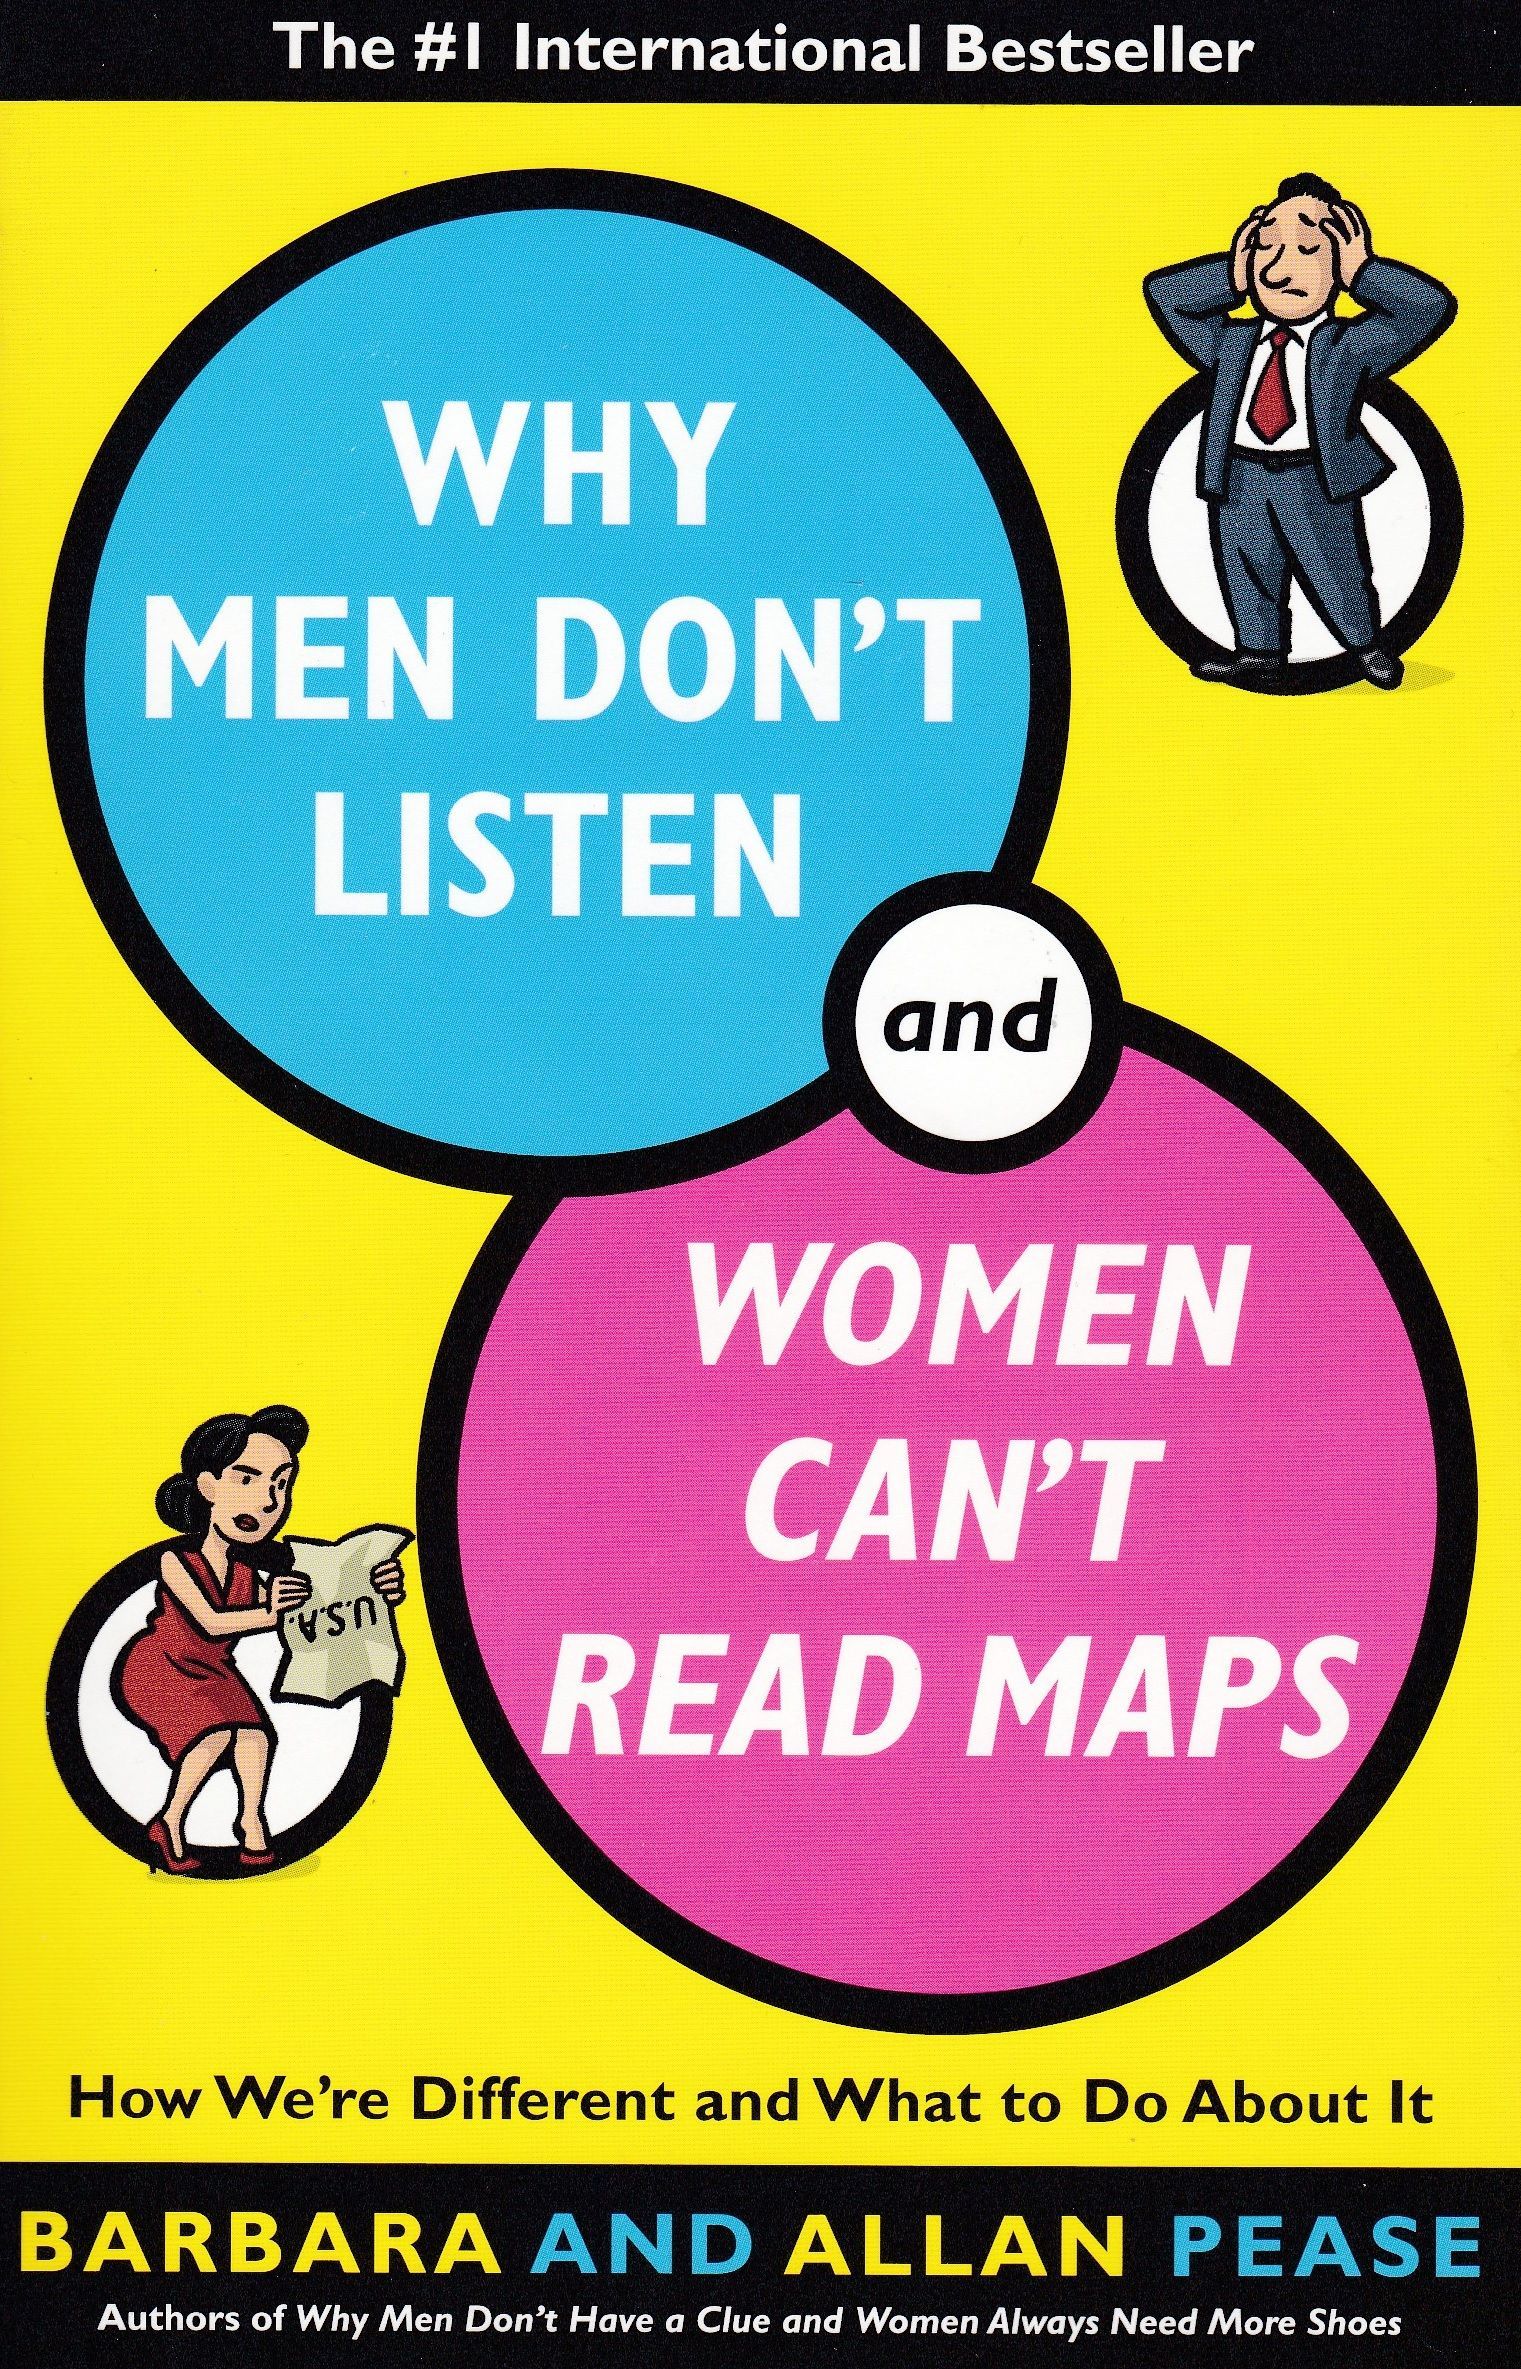 Allan Pease body language. Barbara Pease, Allan Pease the answer. Why men don't listen and women can't read Maps. Why men don't listen and women can't read Maps на русском. Don t read this book